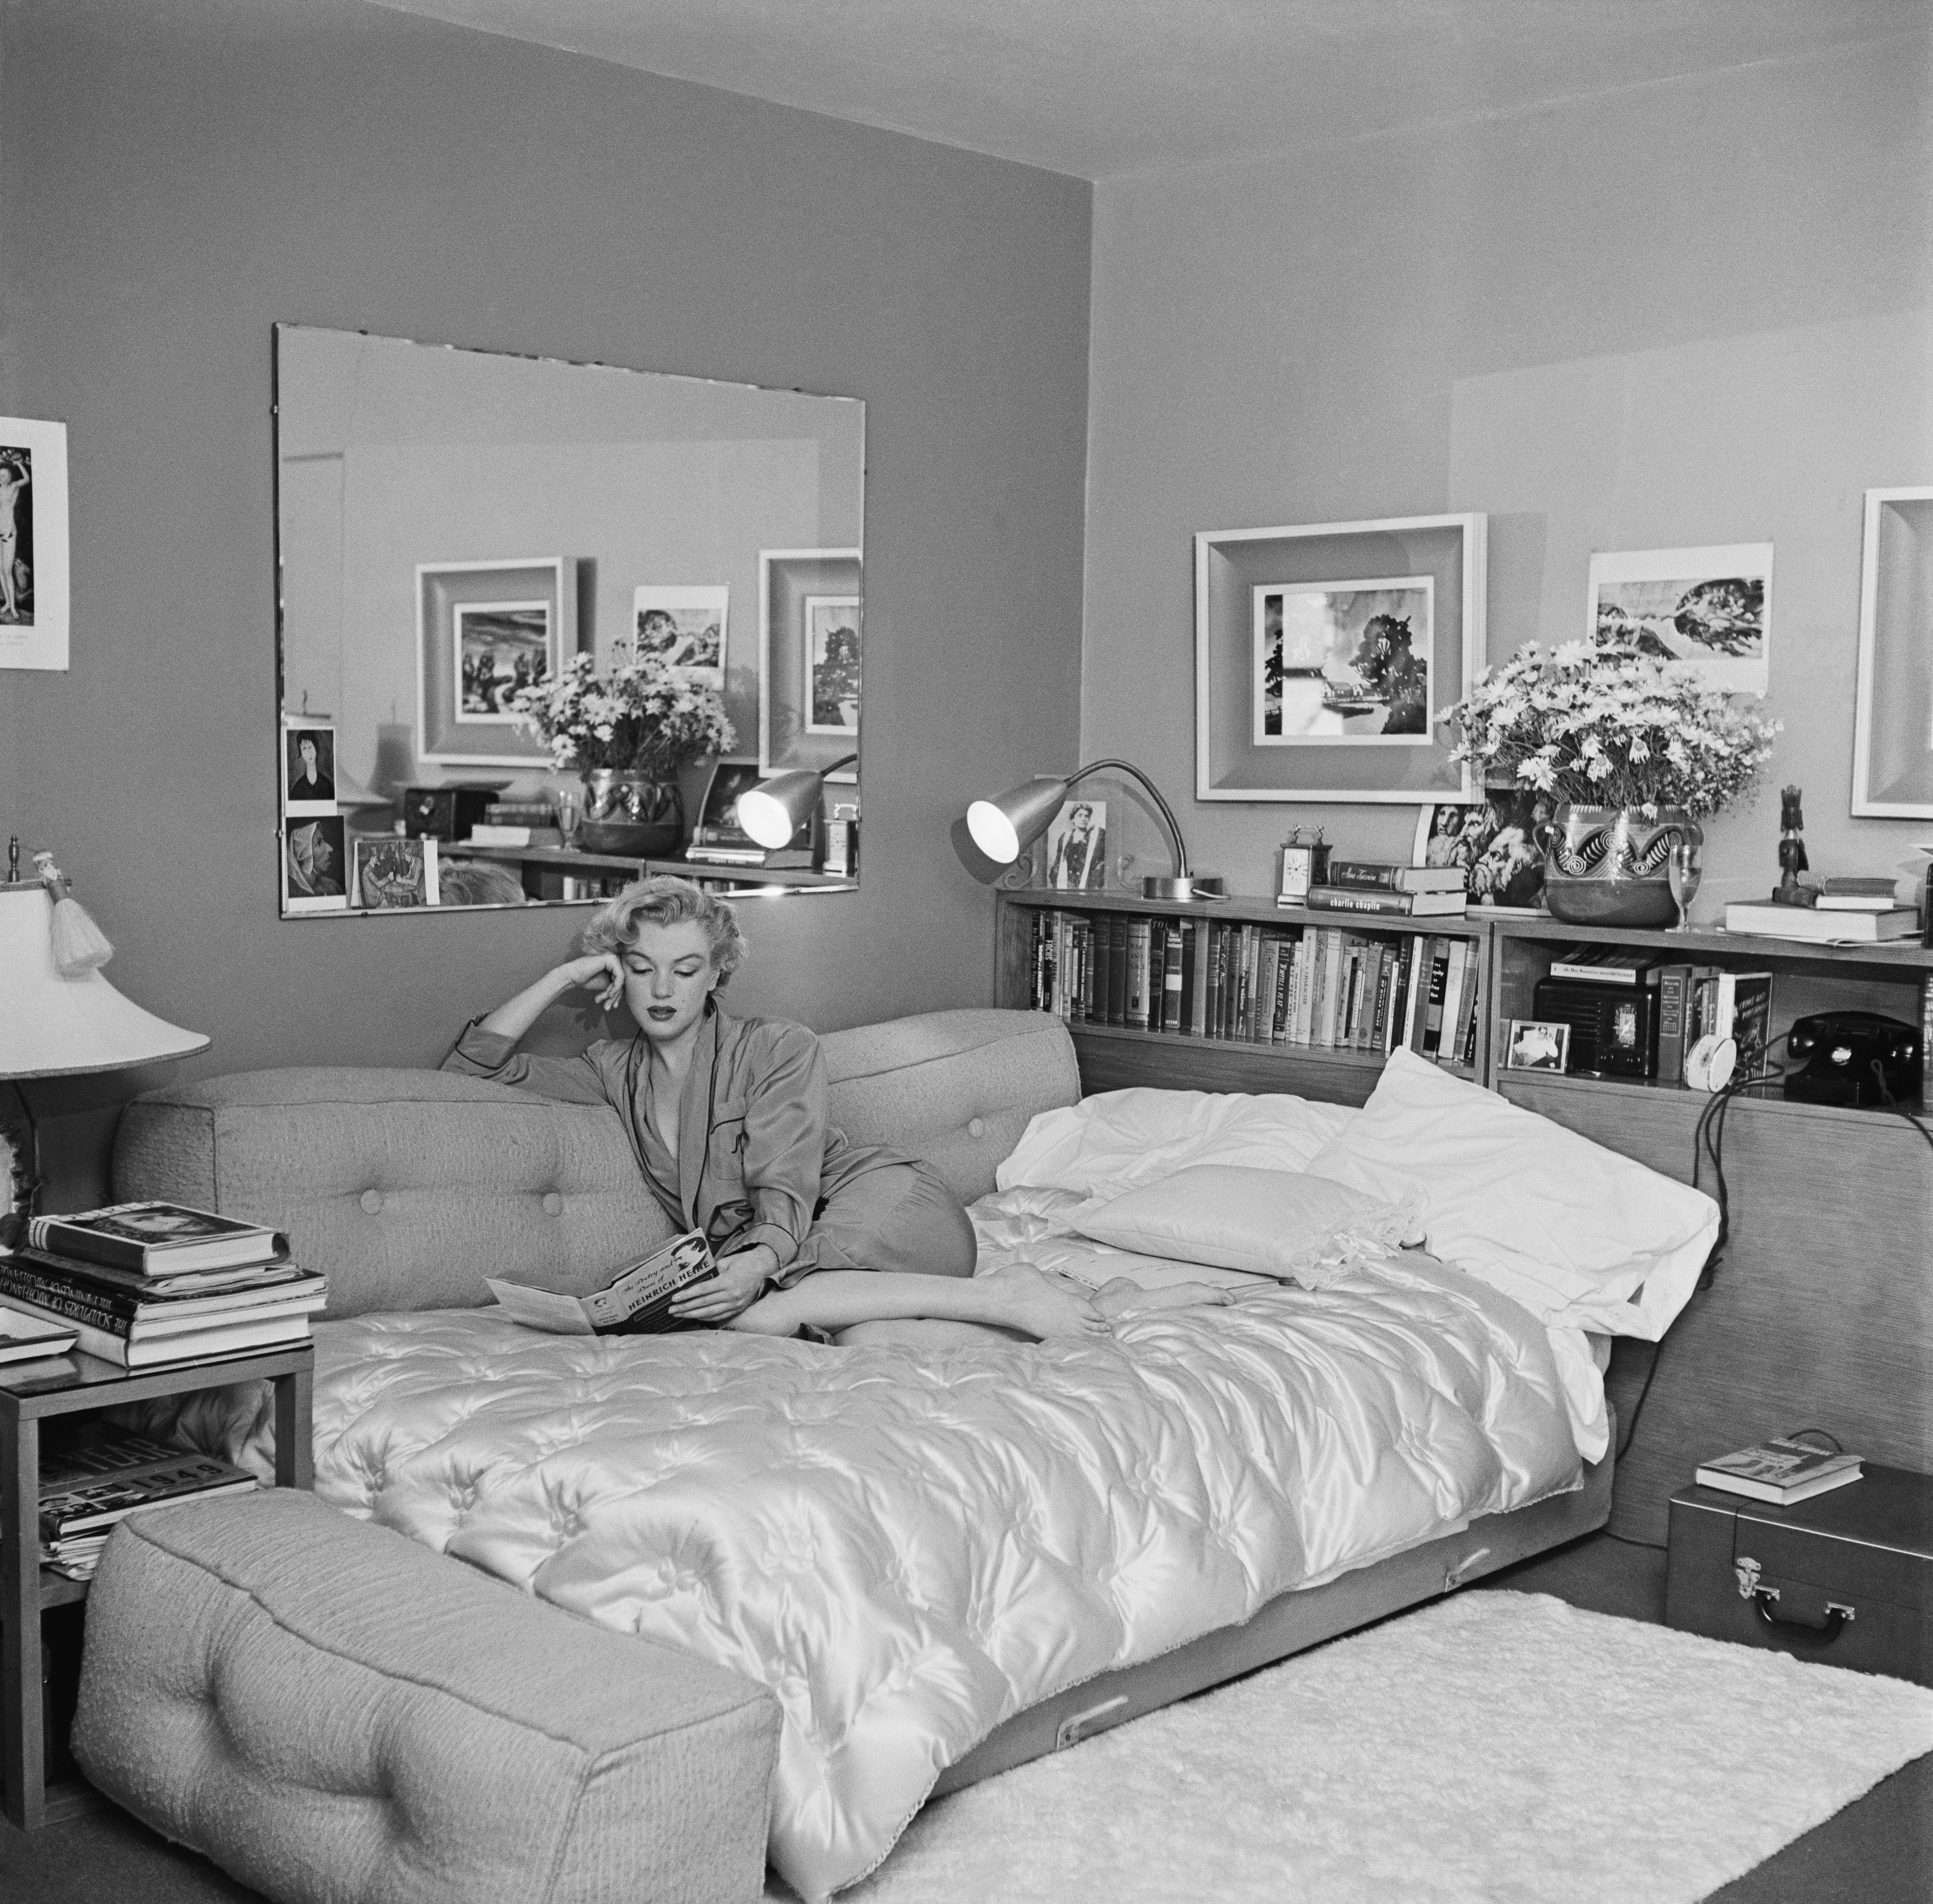 Marilyn Monroe photographed relaxing and reading a book on a sofa bed in 1951. | Source: Getty Images